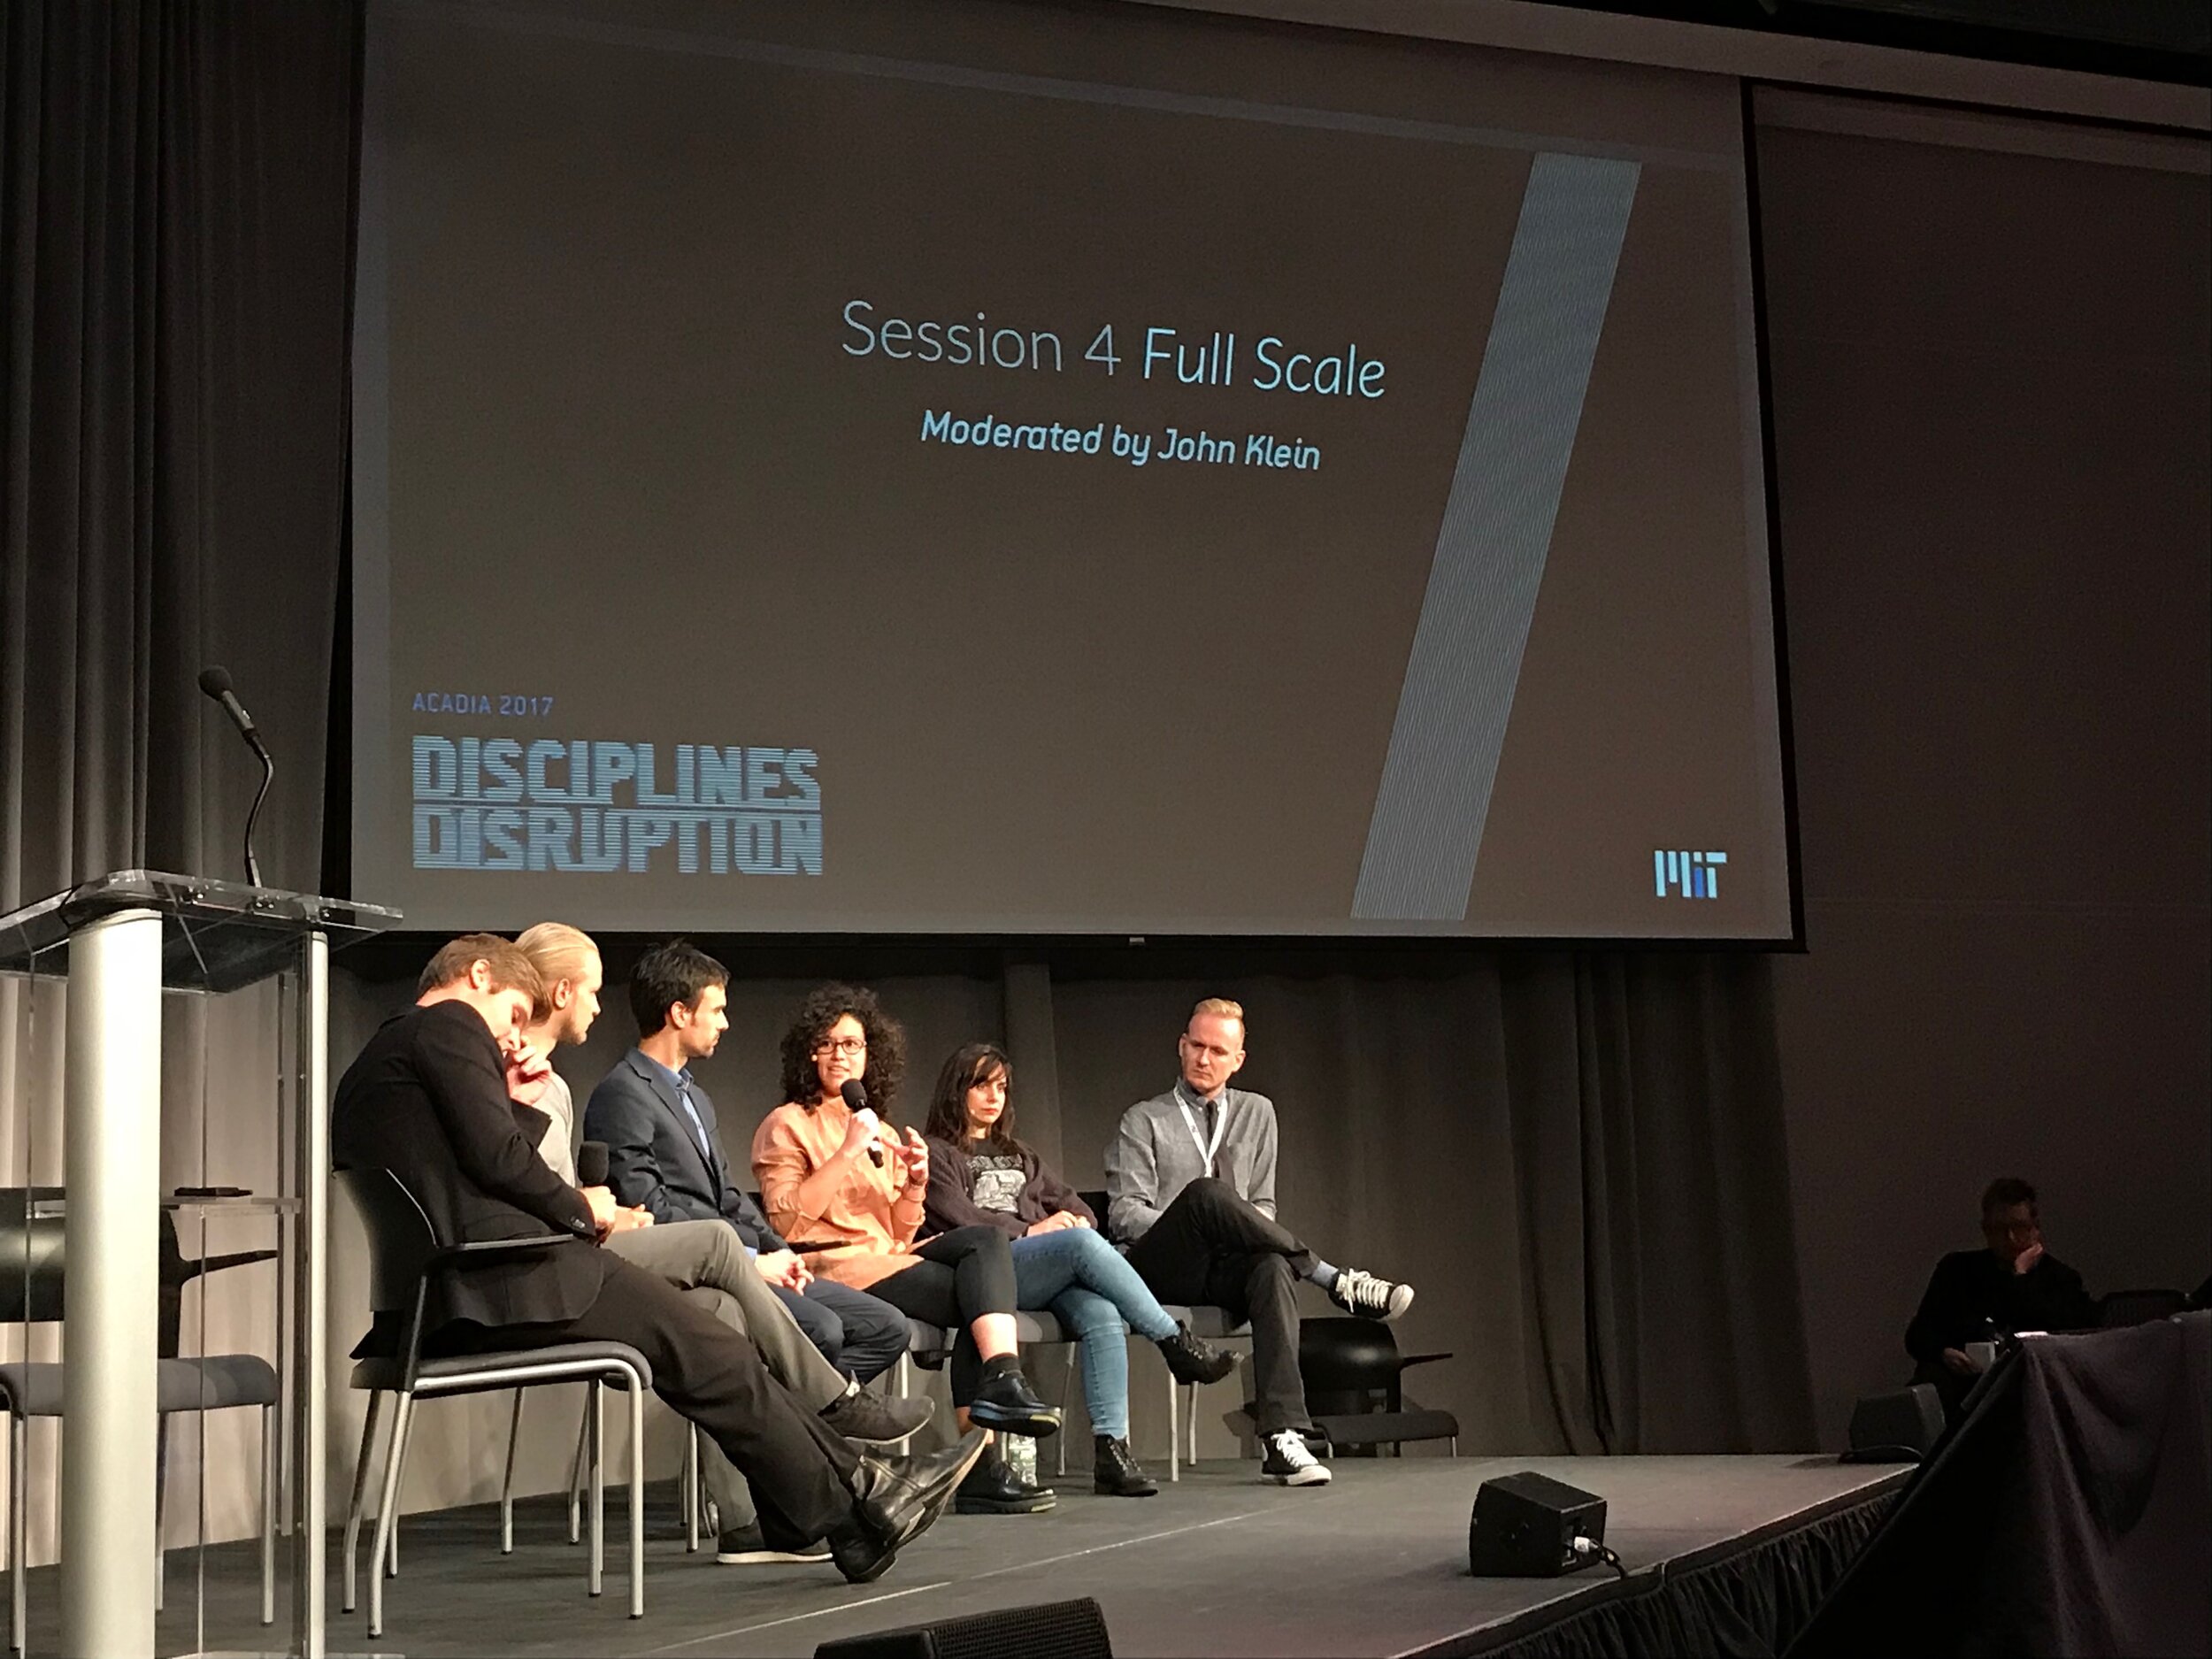  Panel discussion with presenters of the Full Scale session at the ACADIA 2017 Conference, MIT Media Lab. 